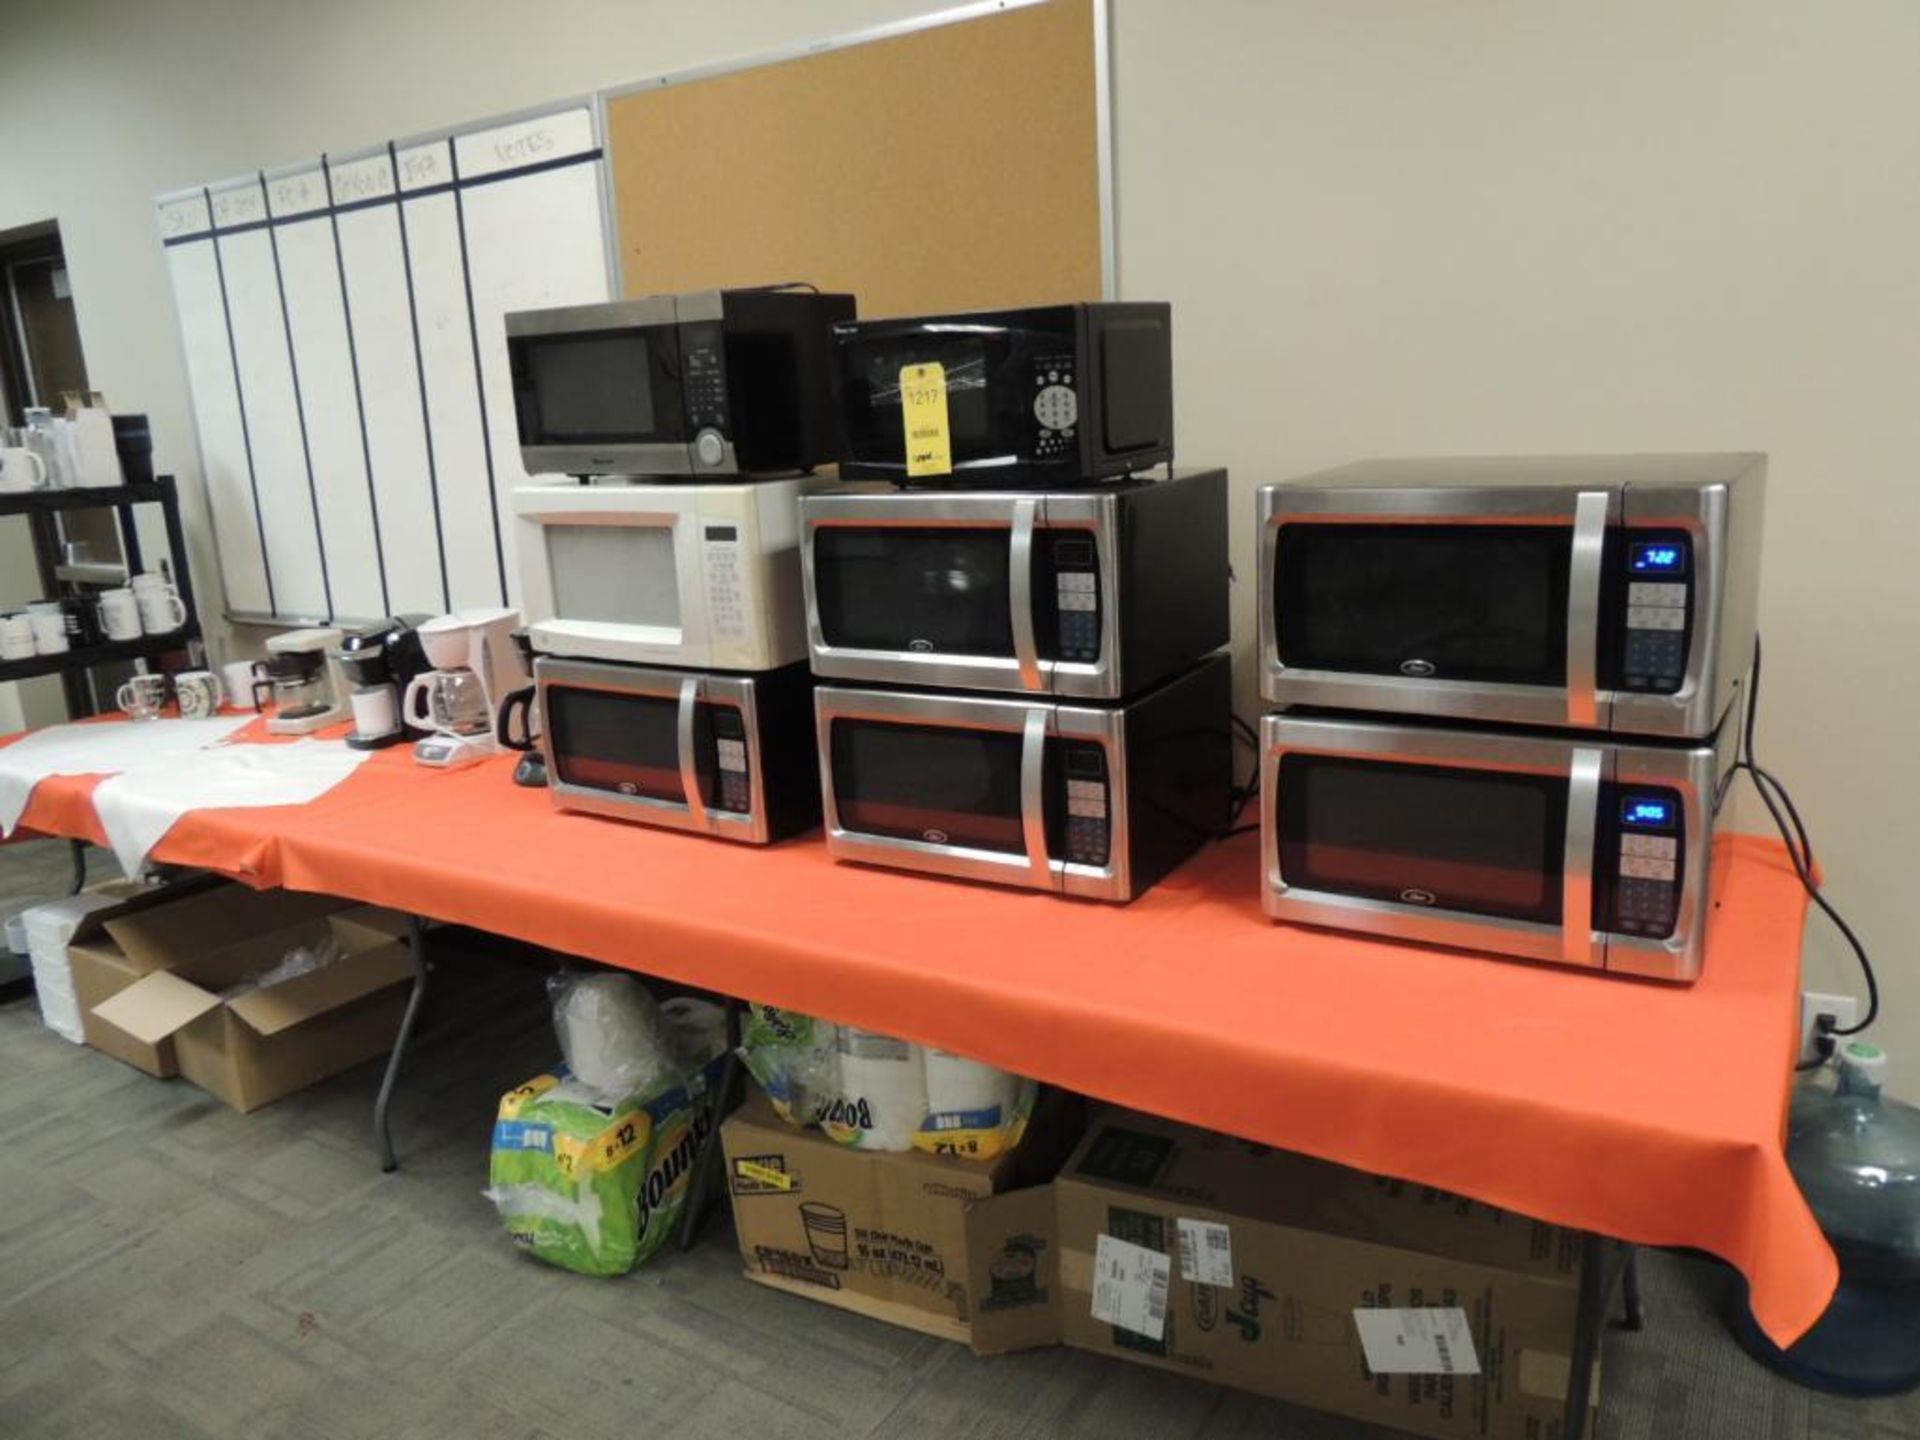 LOT: (8) Microwaves, (4) Coffee Makers, Assorted Coffee Cups